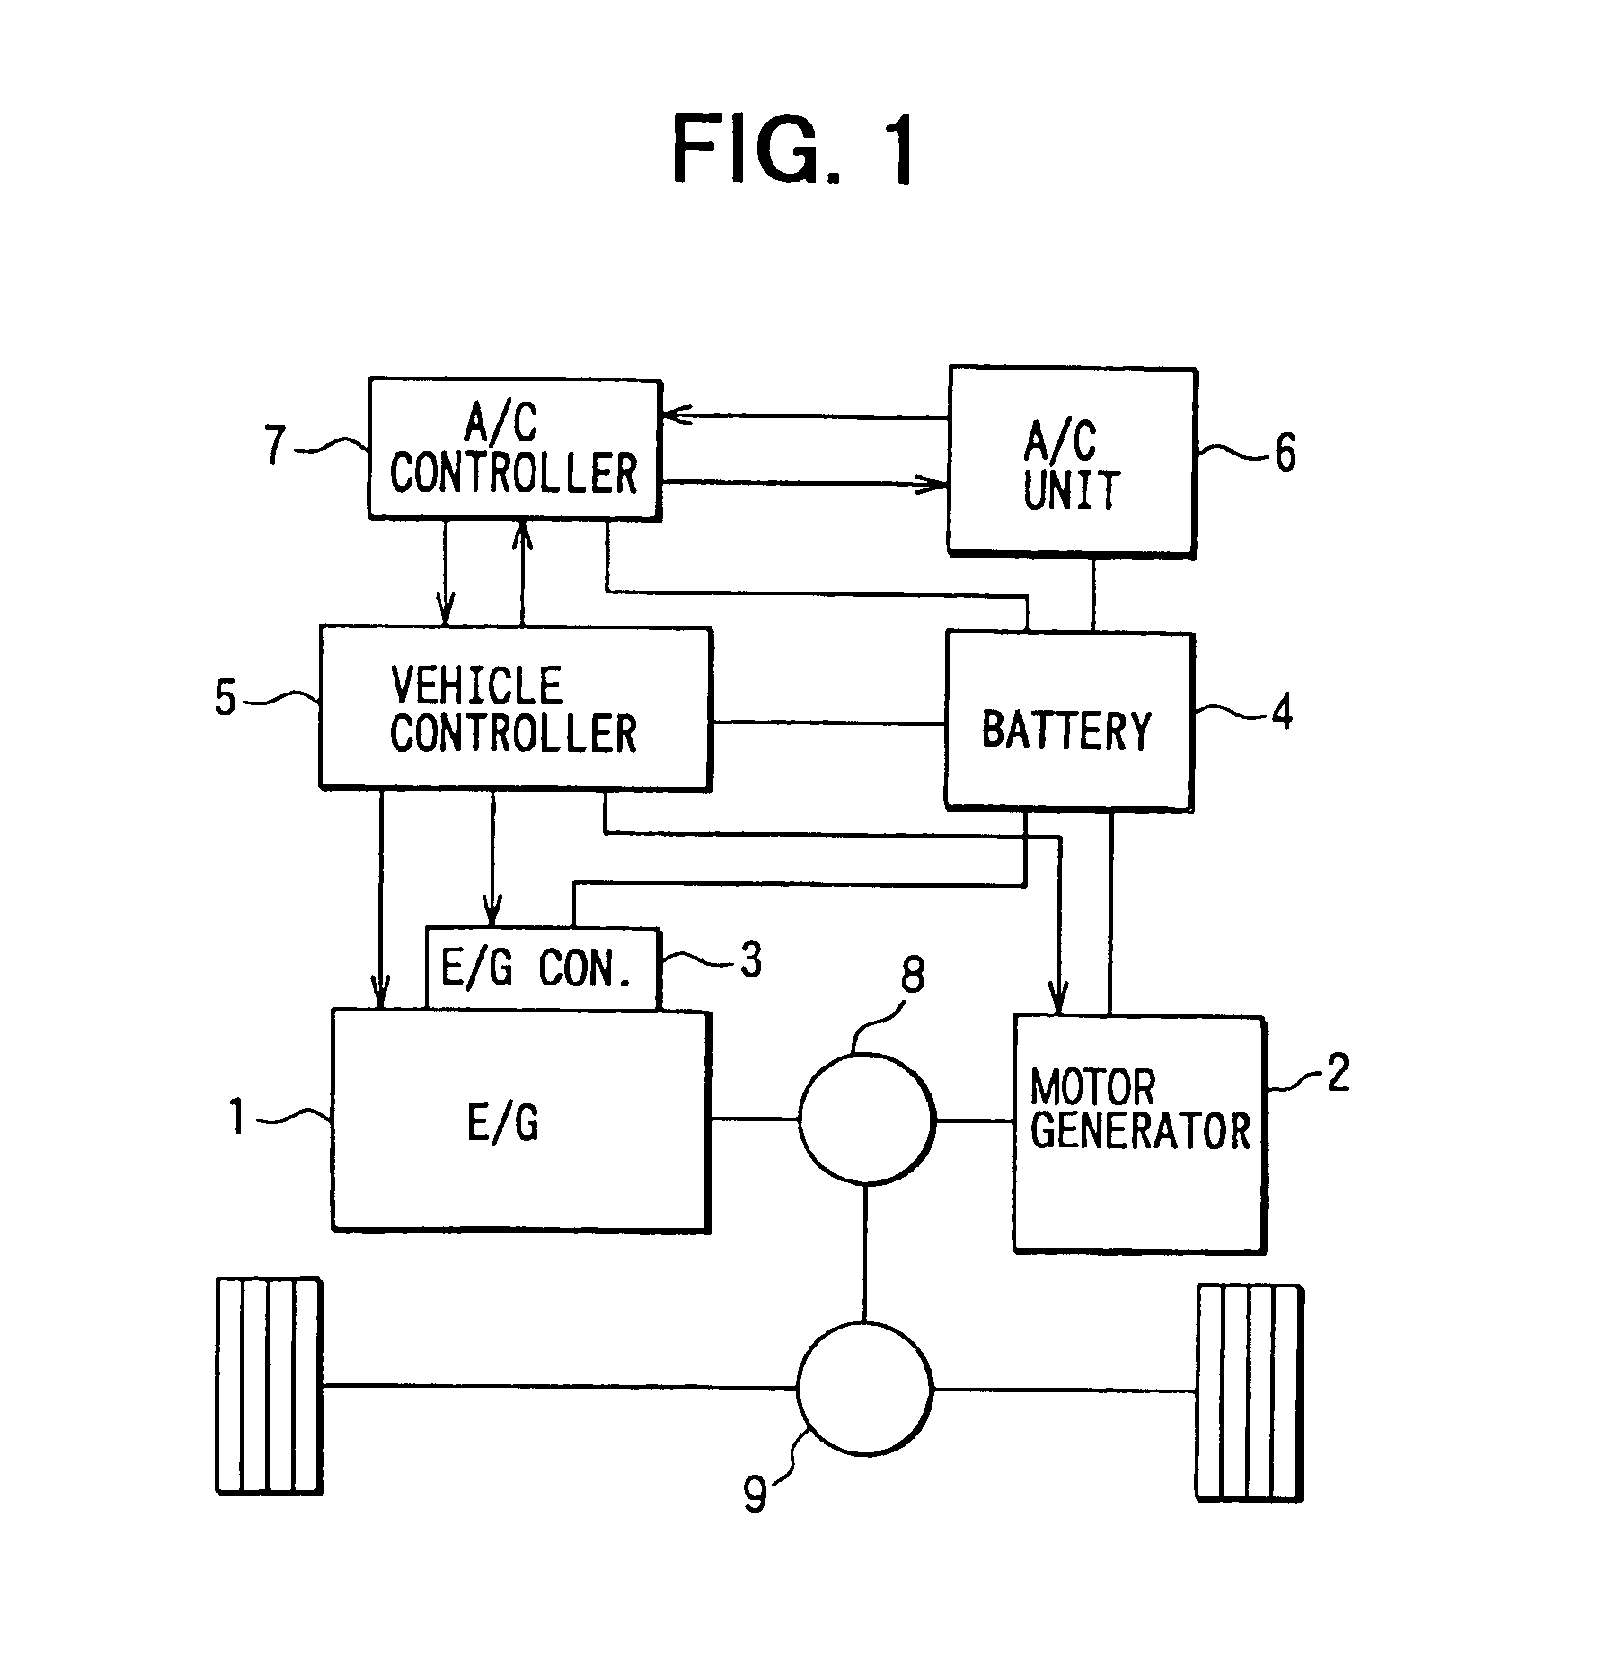 Air conditioner for hybrid vehicle